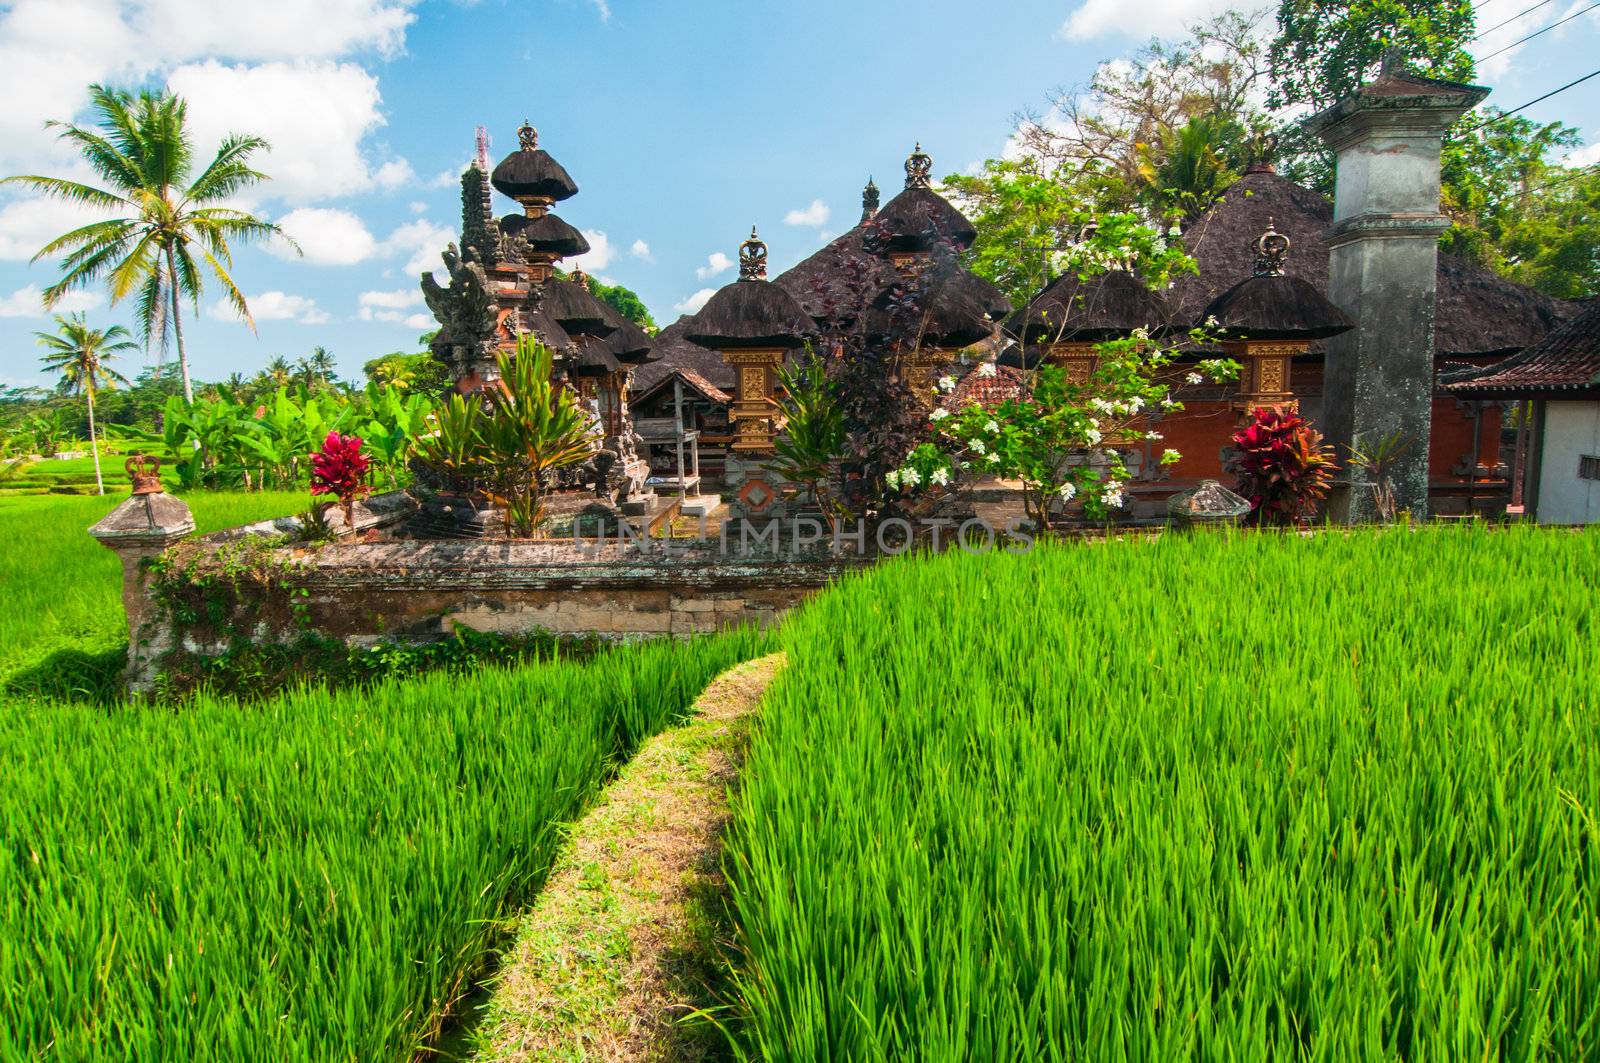 Small temple at rice terrace, Bali, Indonesia by nvelichko